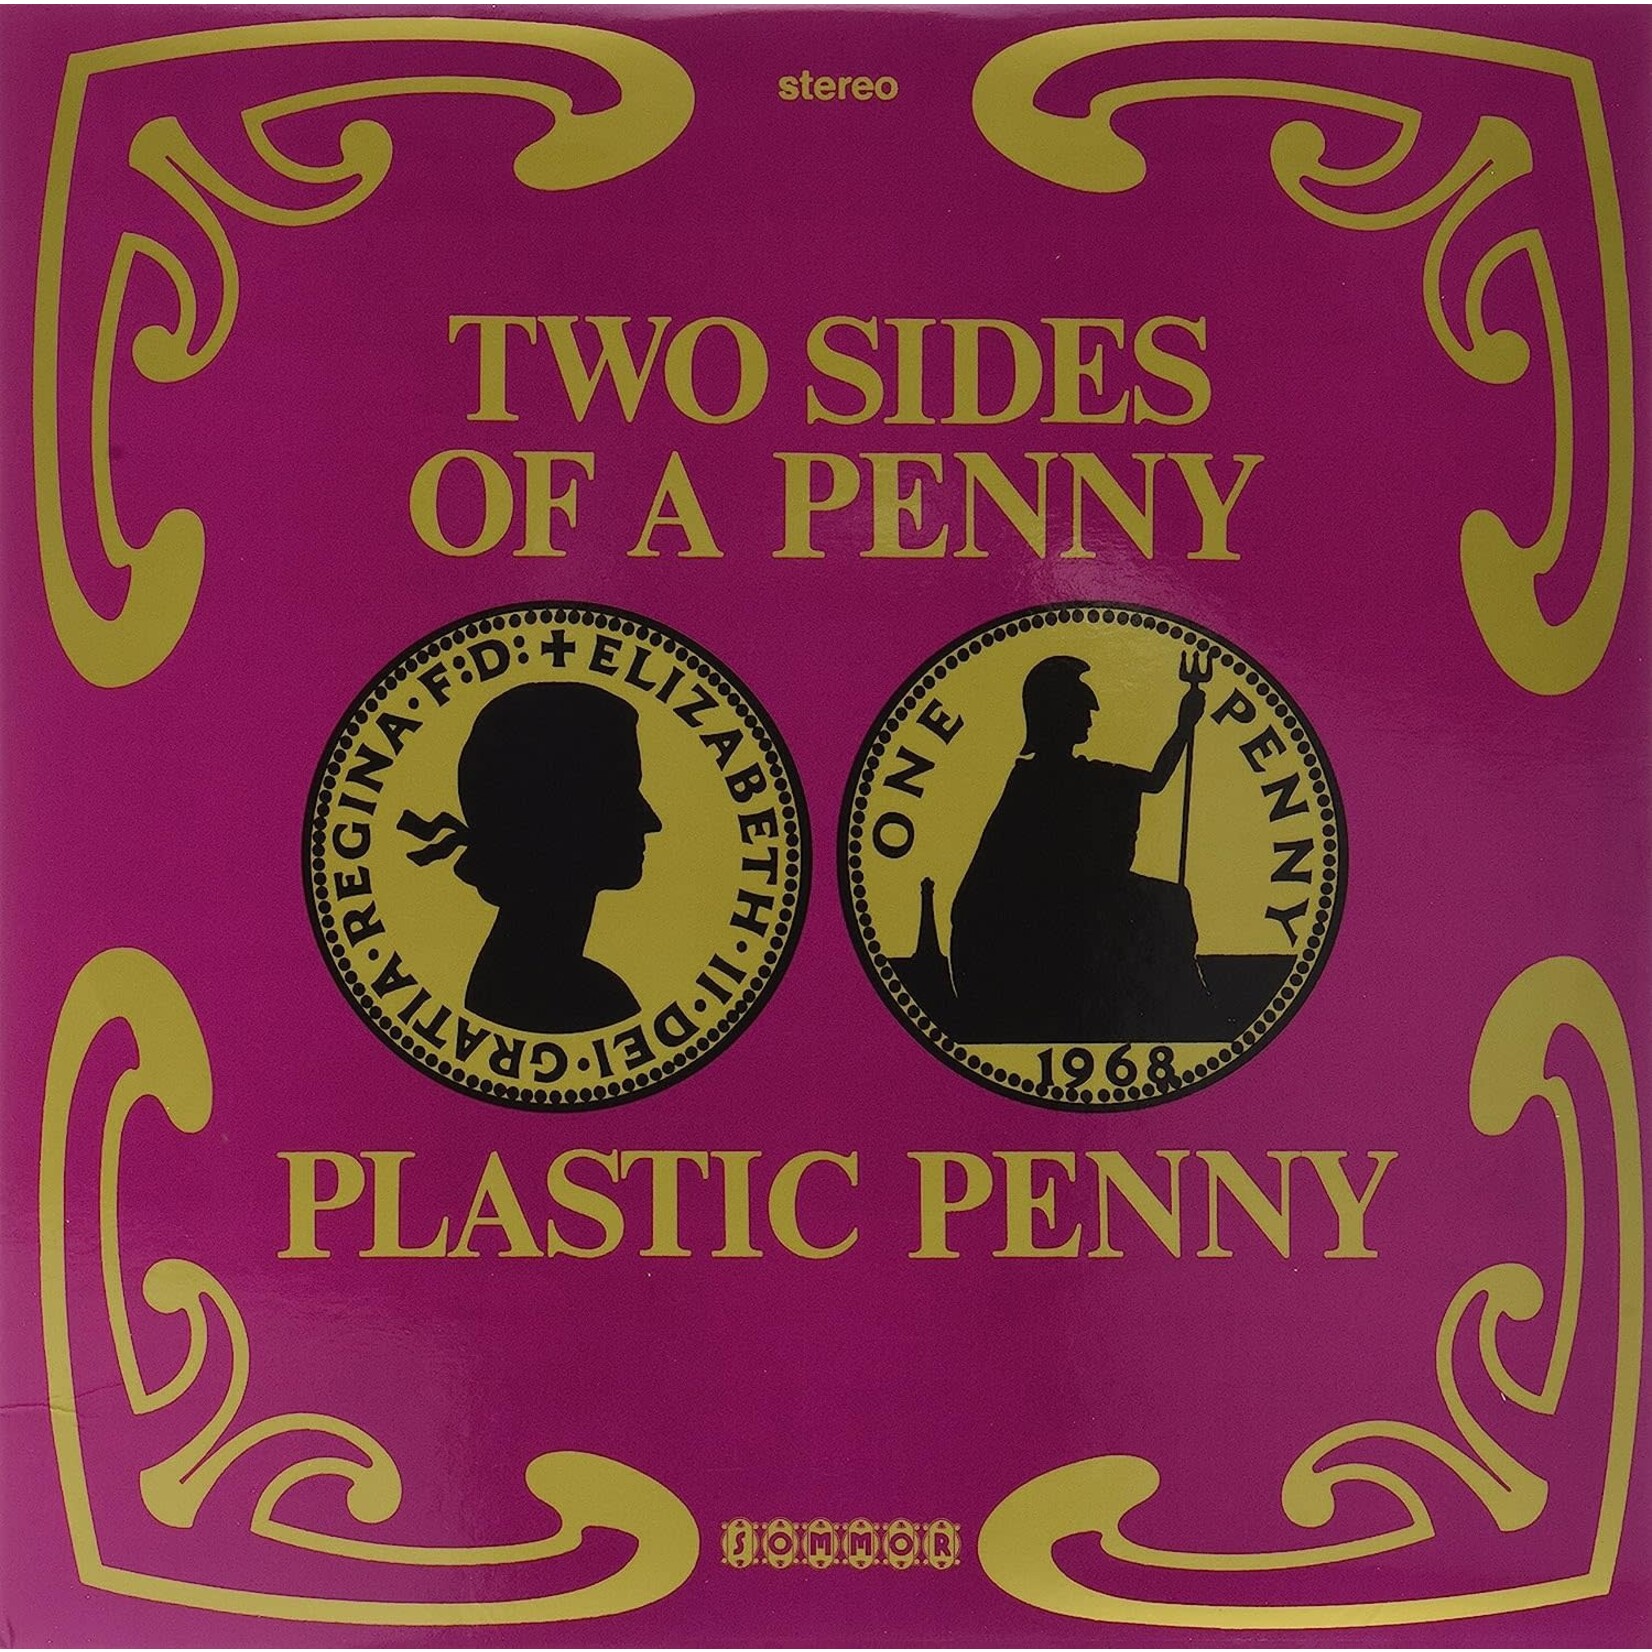 Vinyl Plastic Penny - Two Sides of a Penny